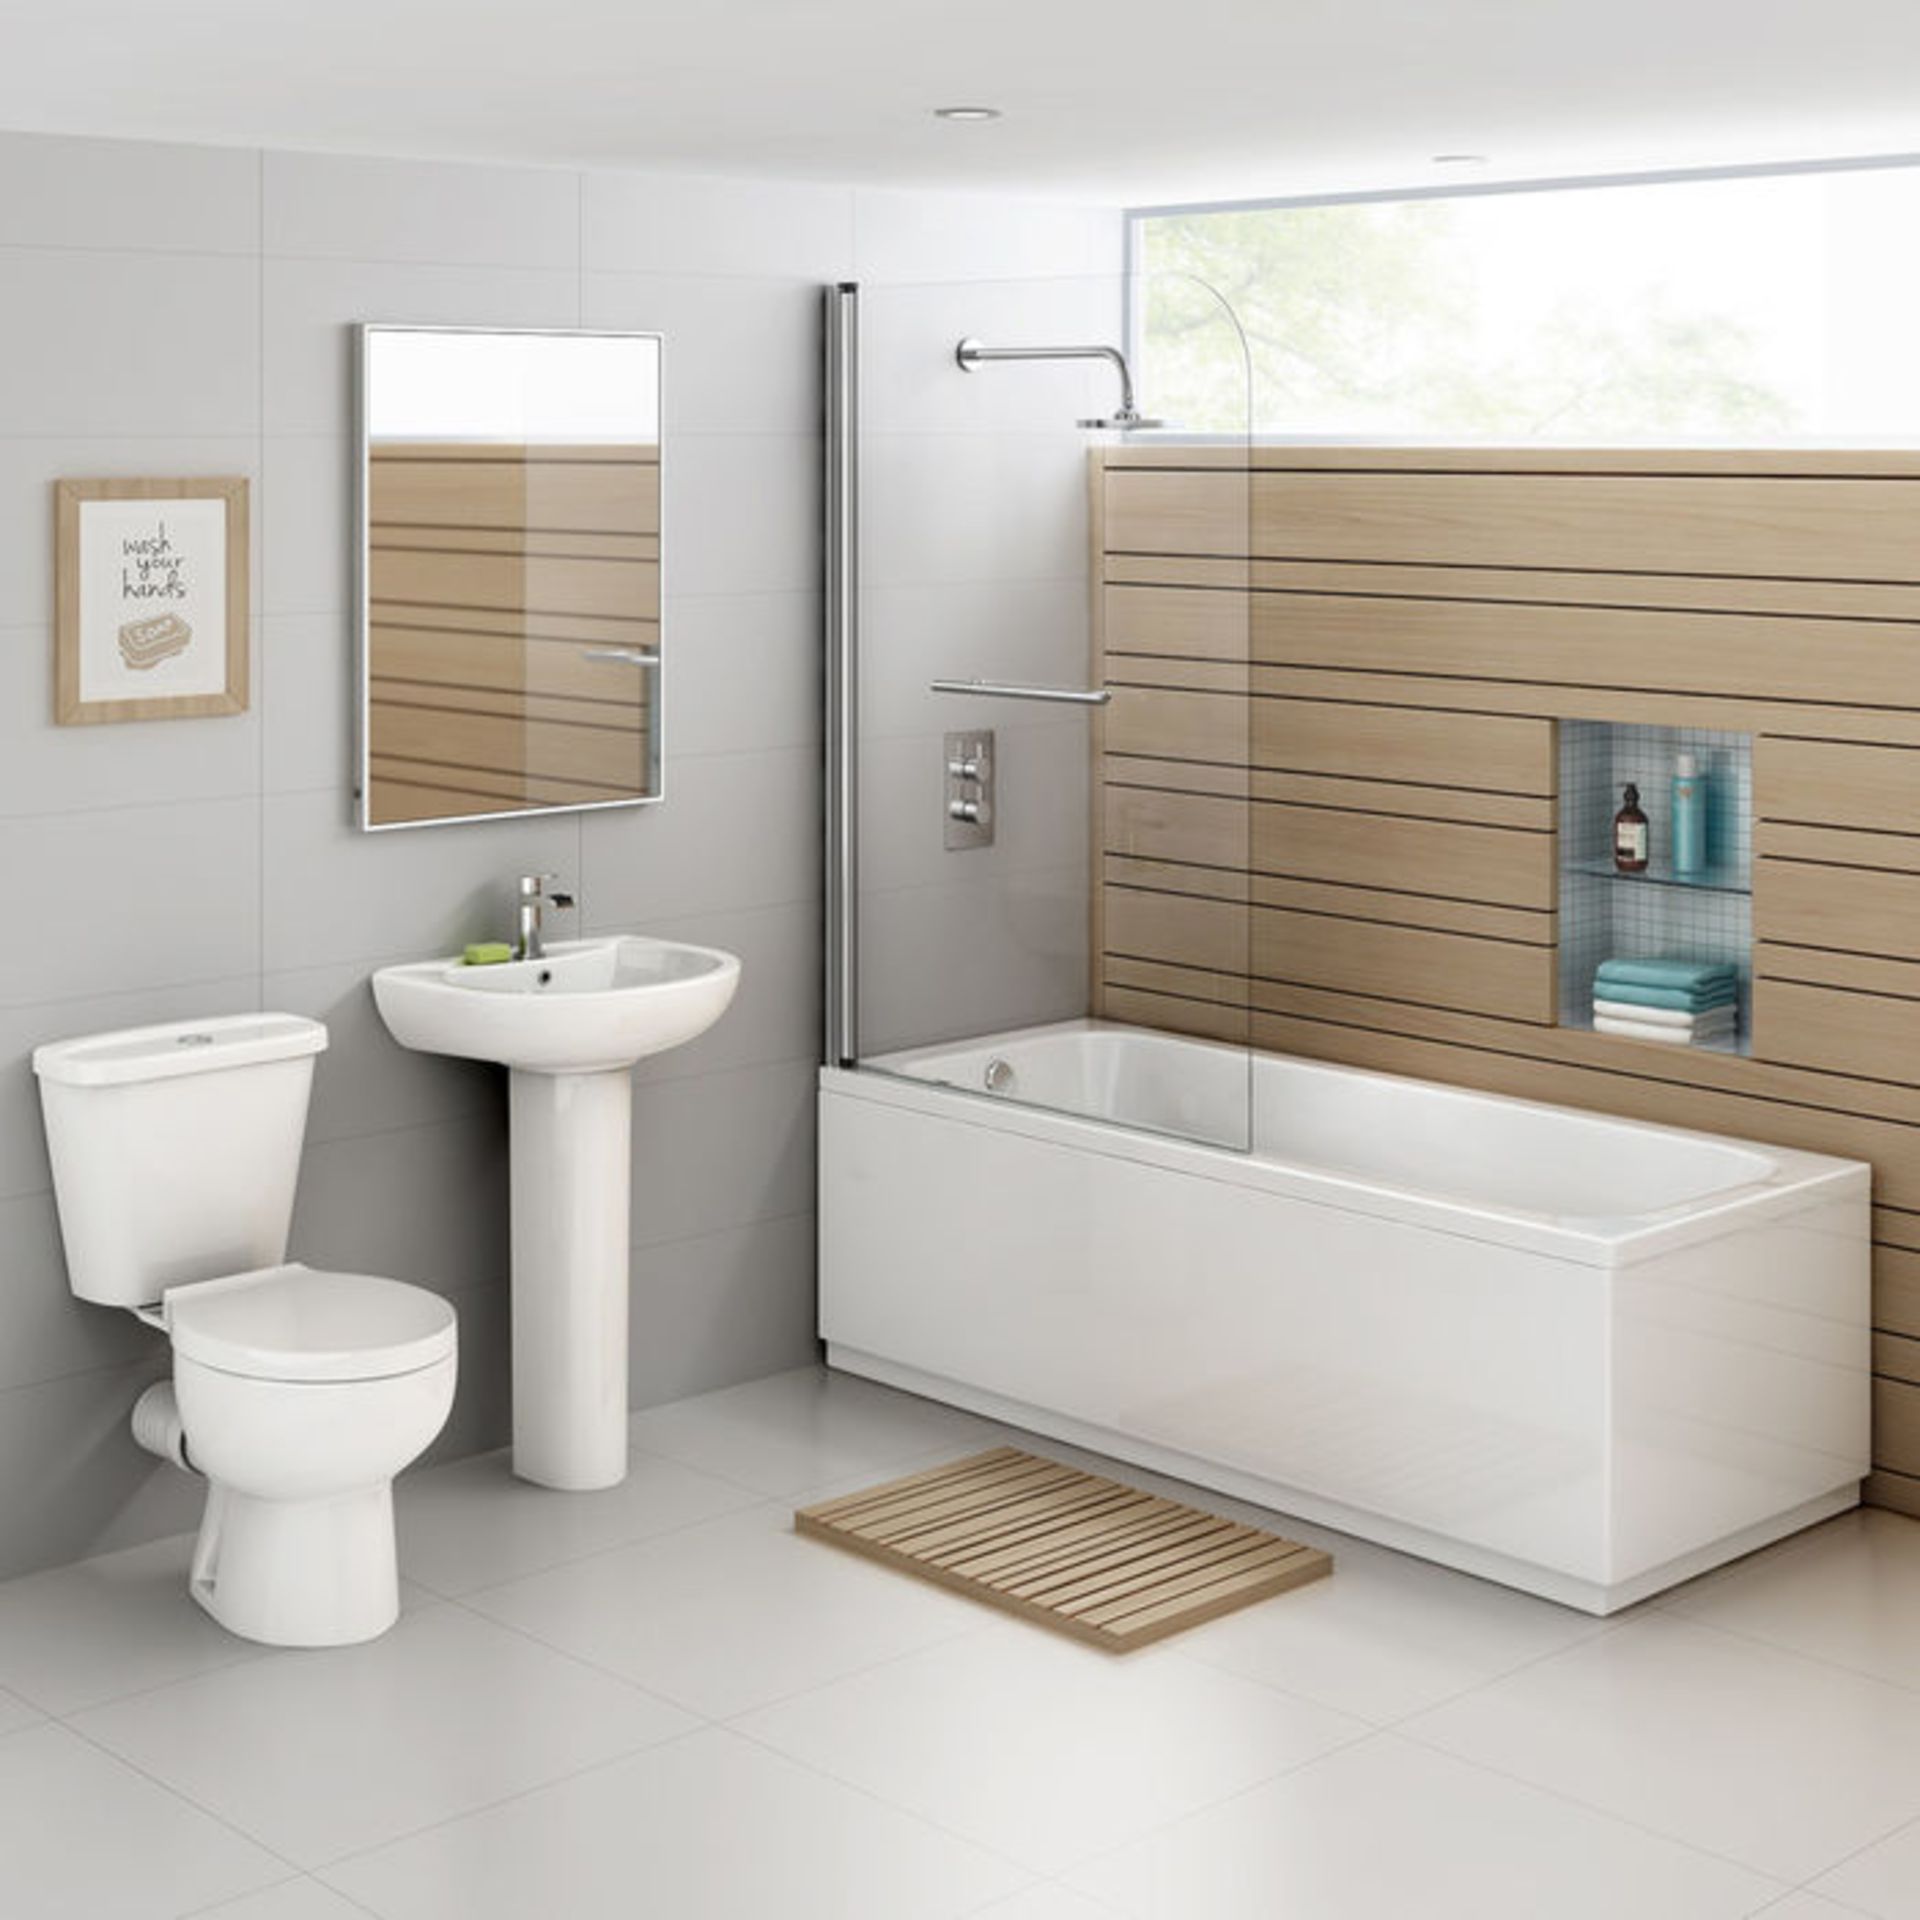 (AZ71) 1000mm - 4mm - Straight Bath Screen & Towel Rail. RRP £174.99. A great addition to your - Image 3 of 3